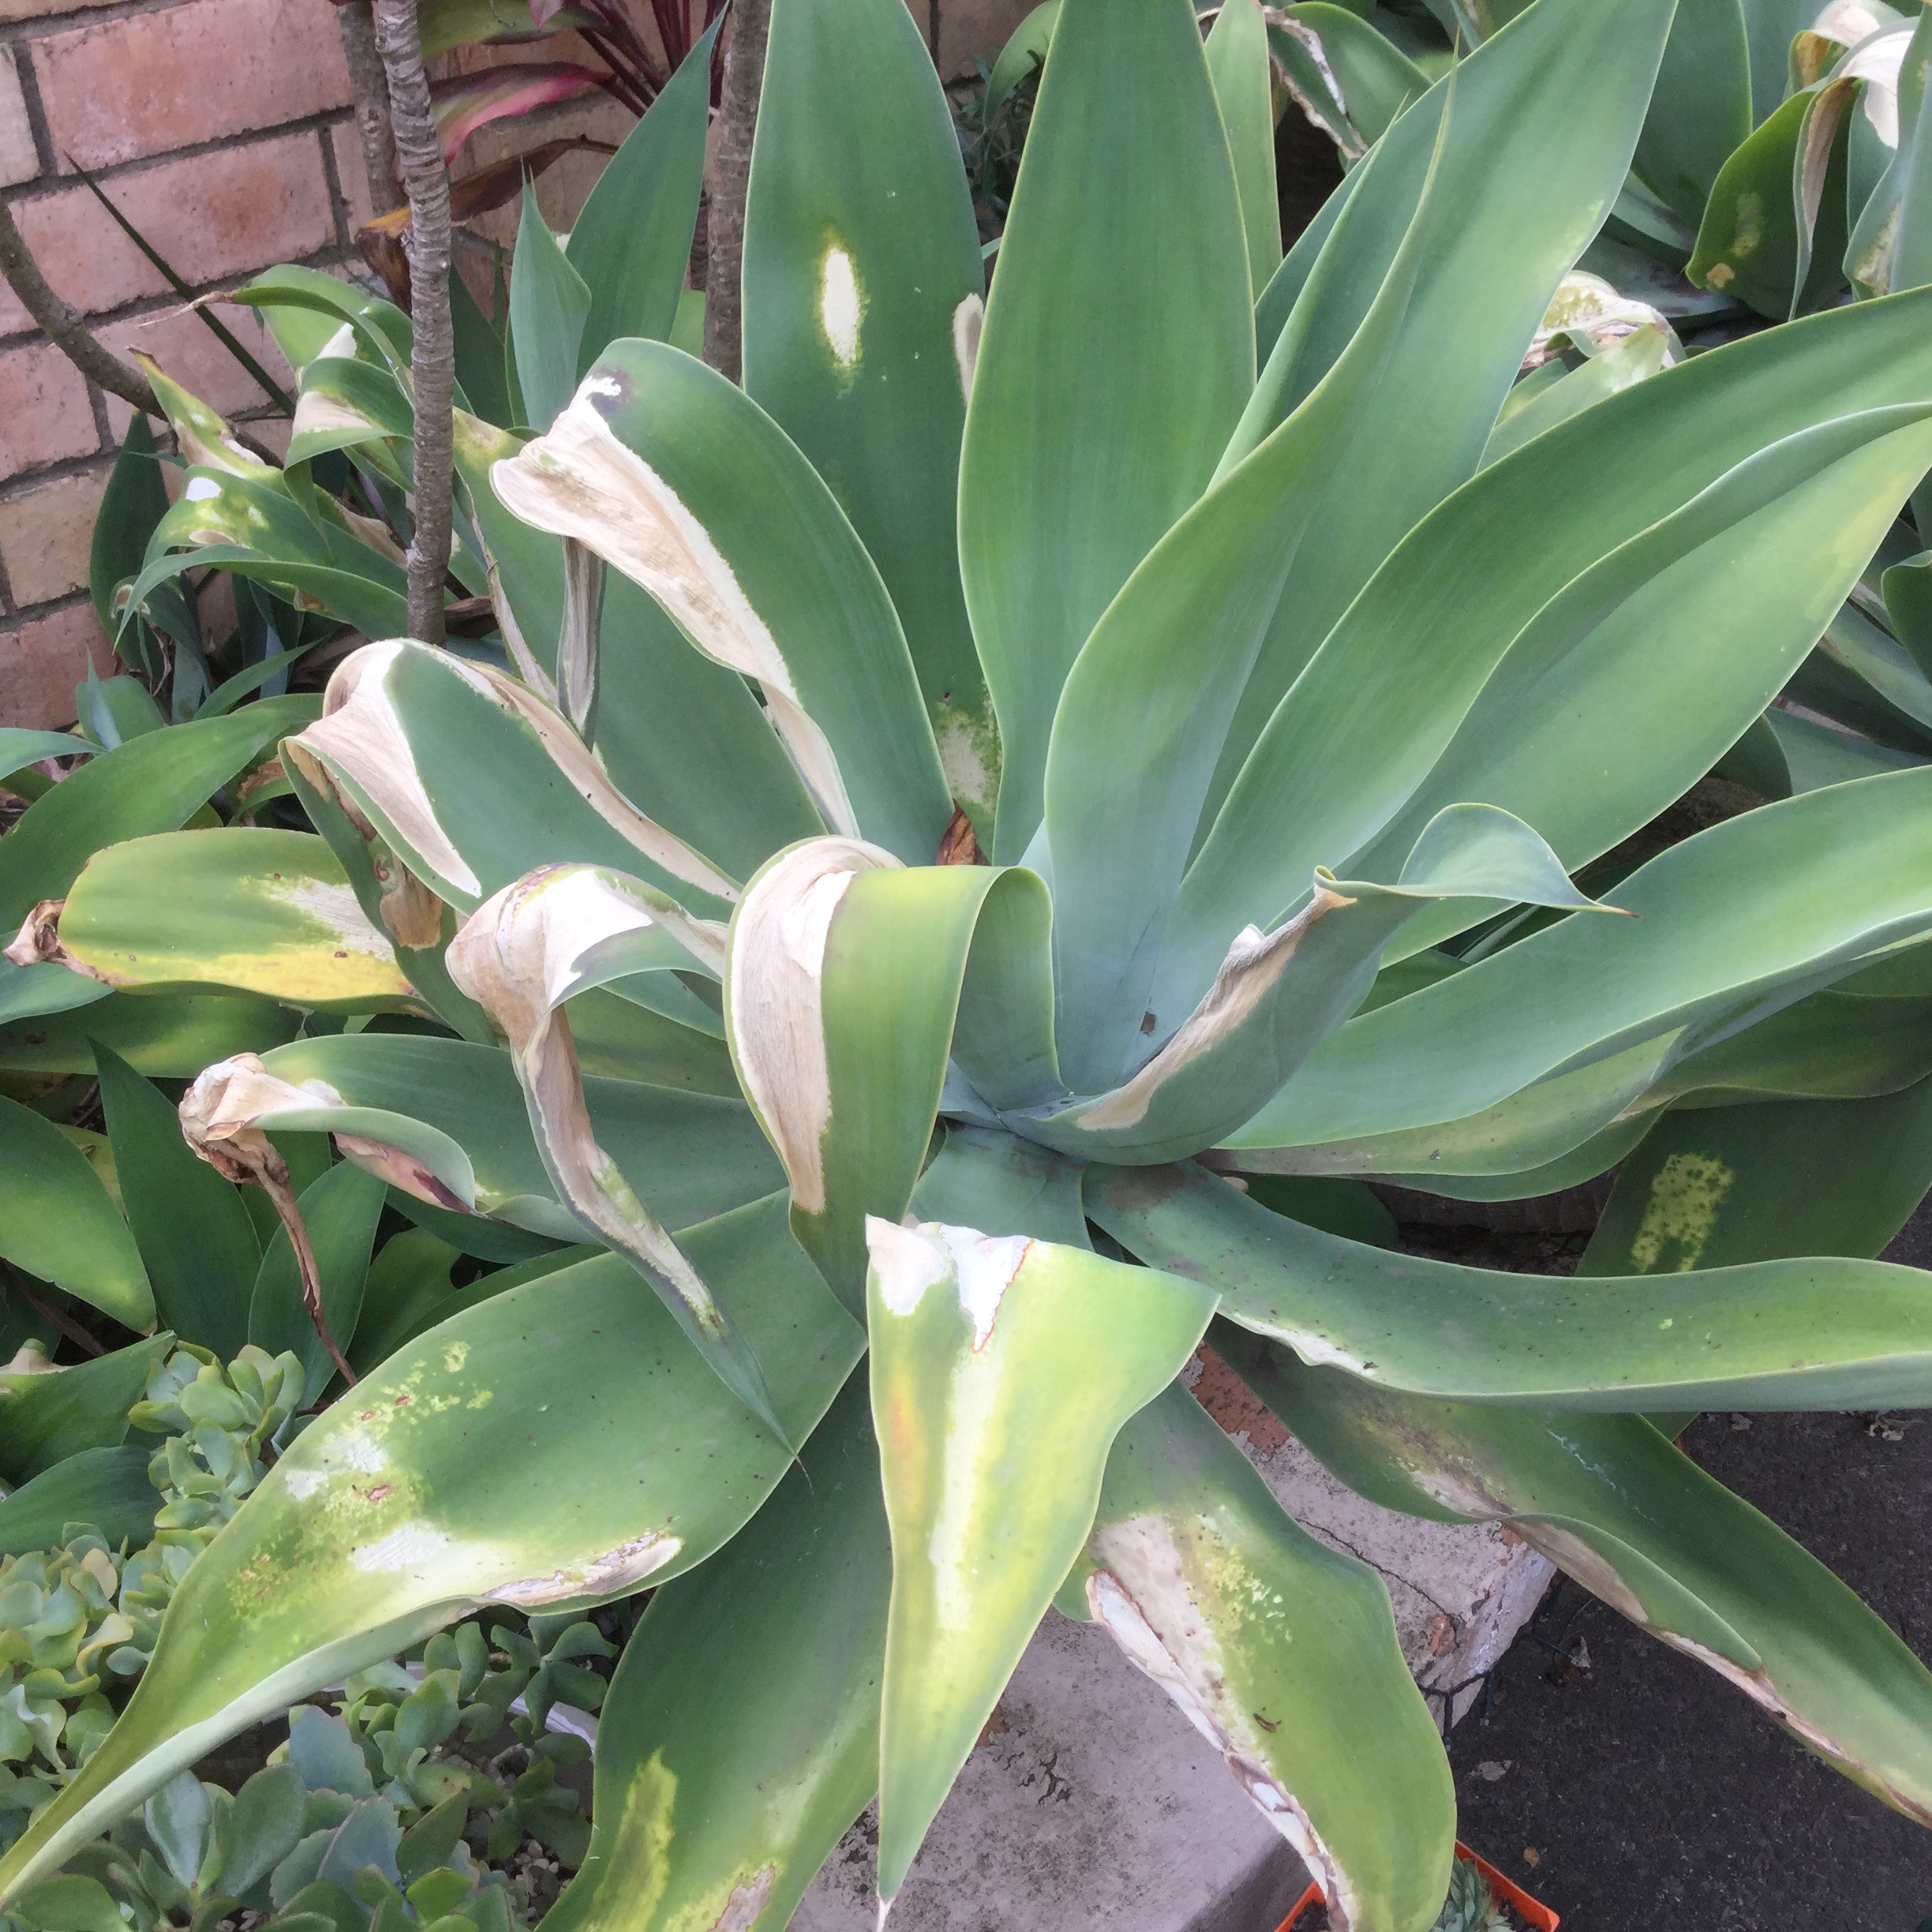 My agave attenuata leaves have started to go creamy white and die ...